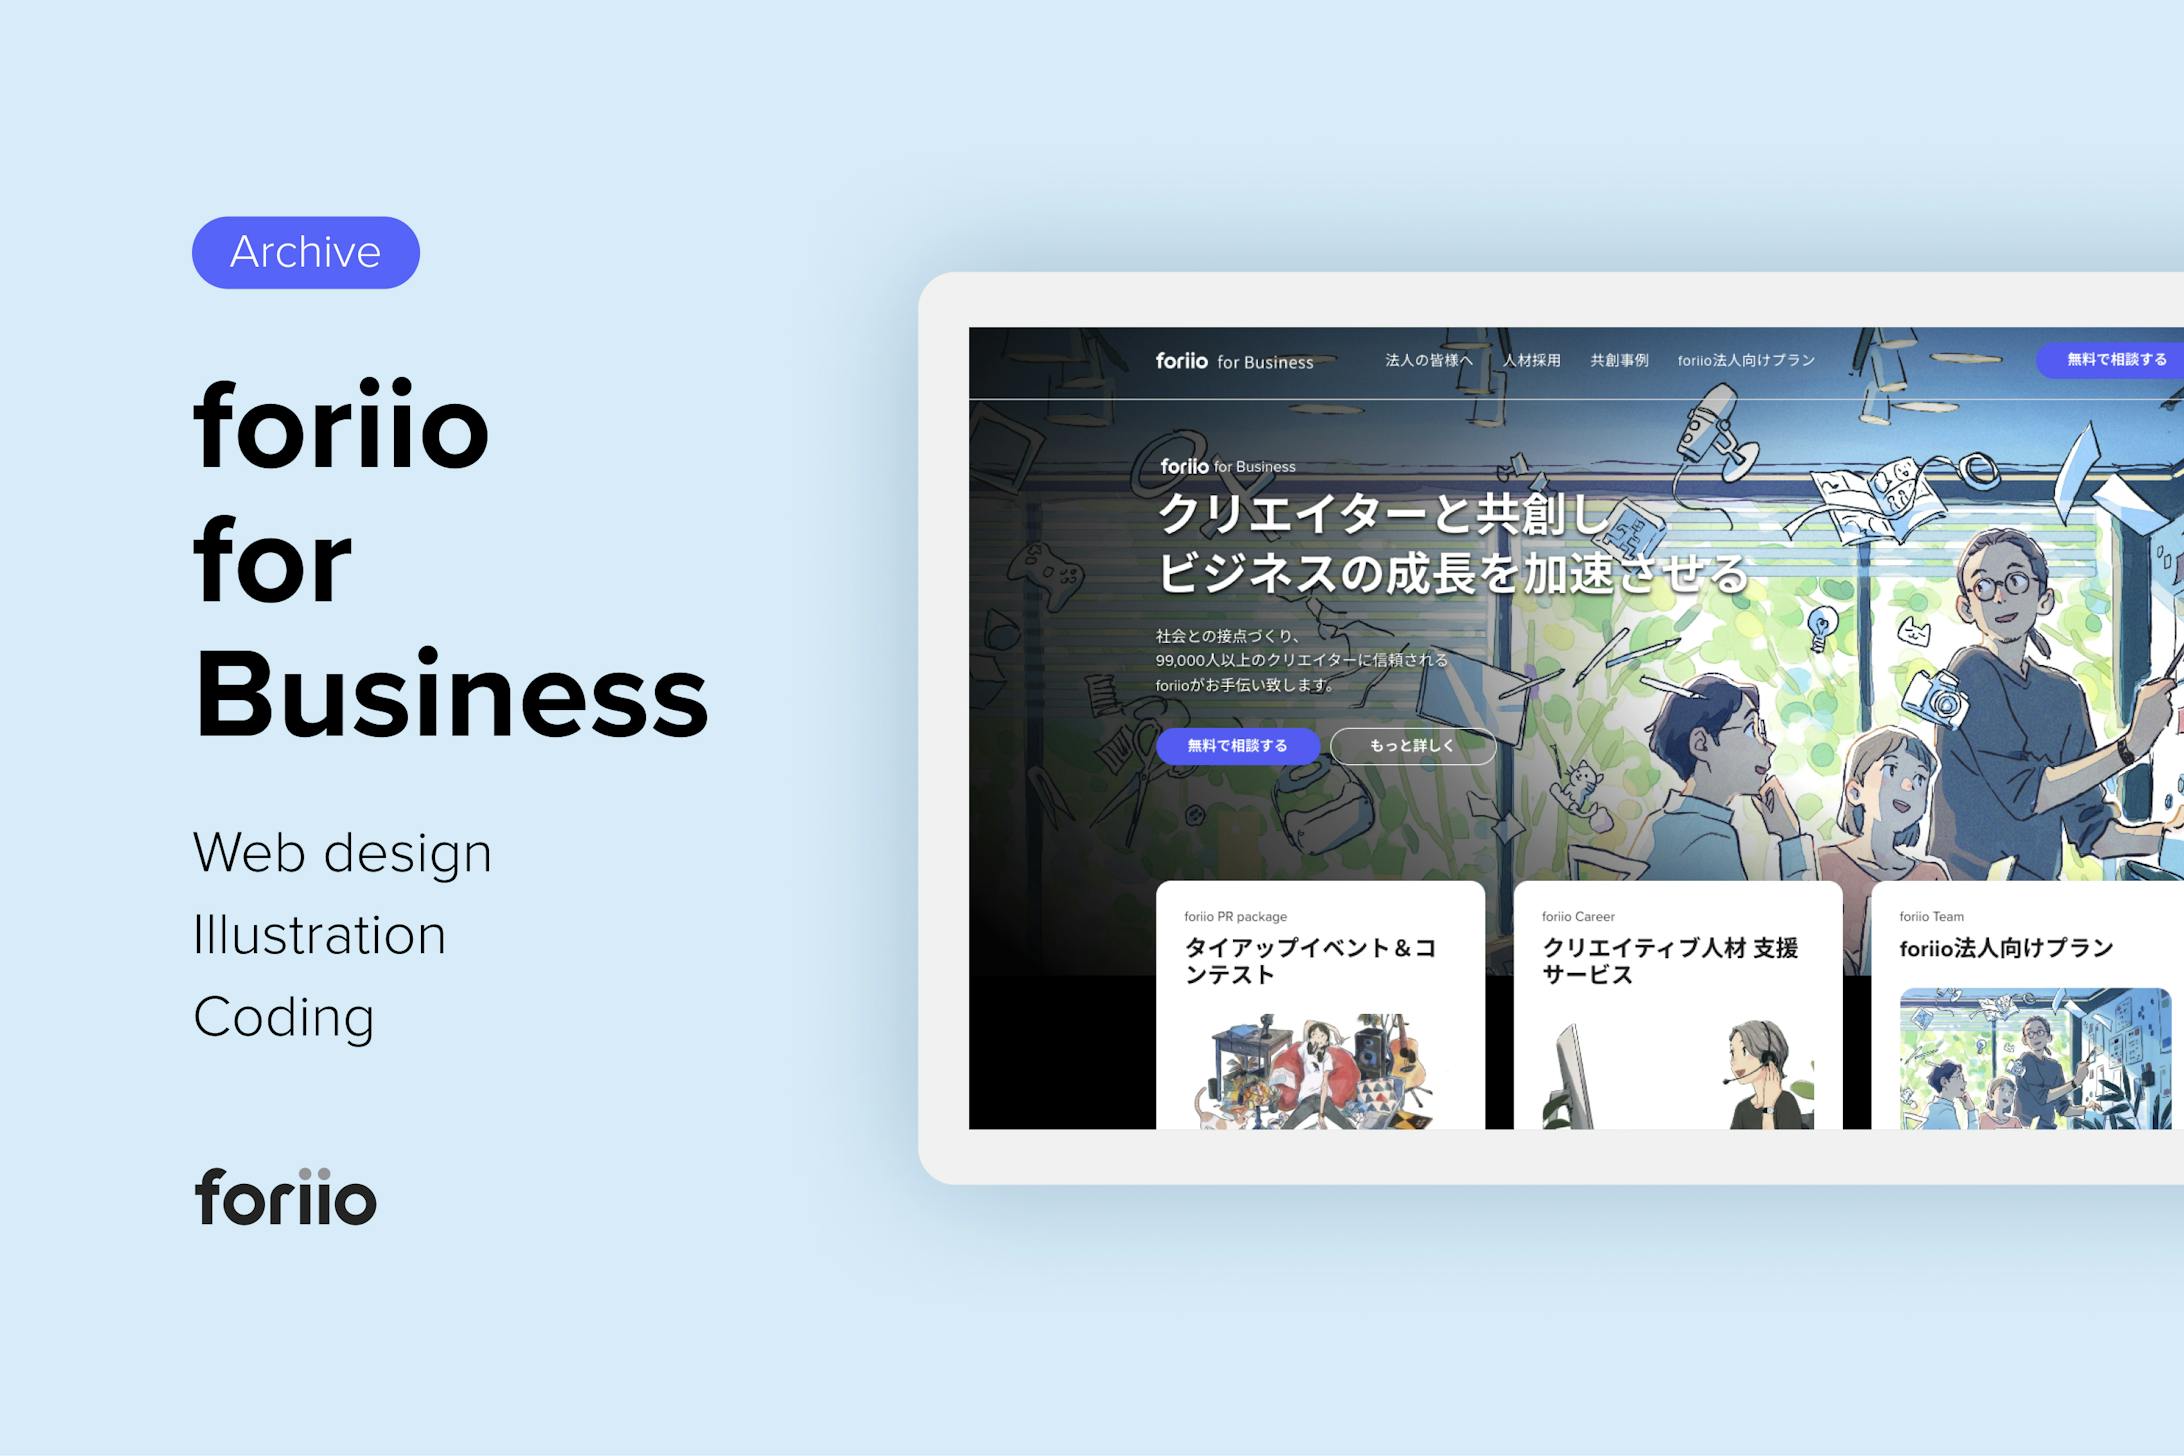 foriio for Business - 法人向けサービス紹介ページ-1